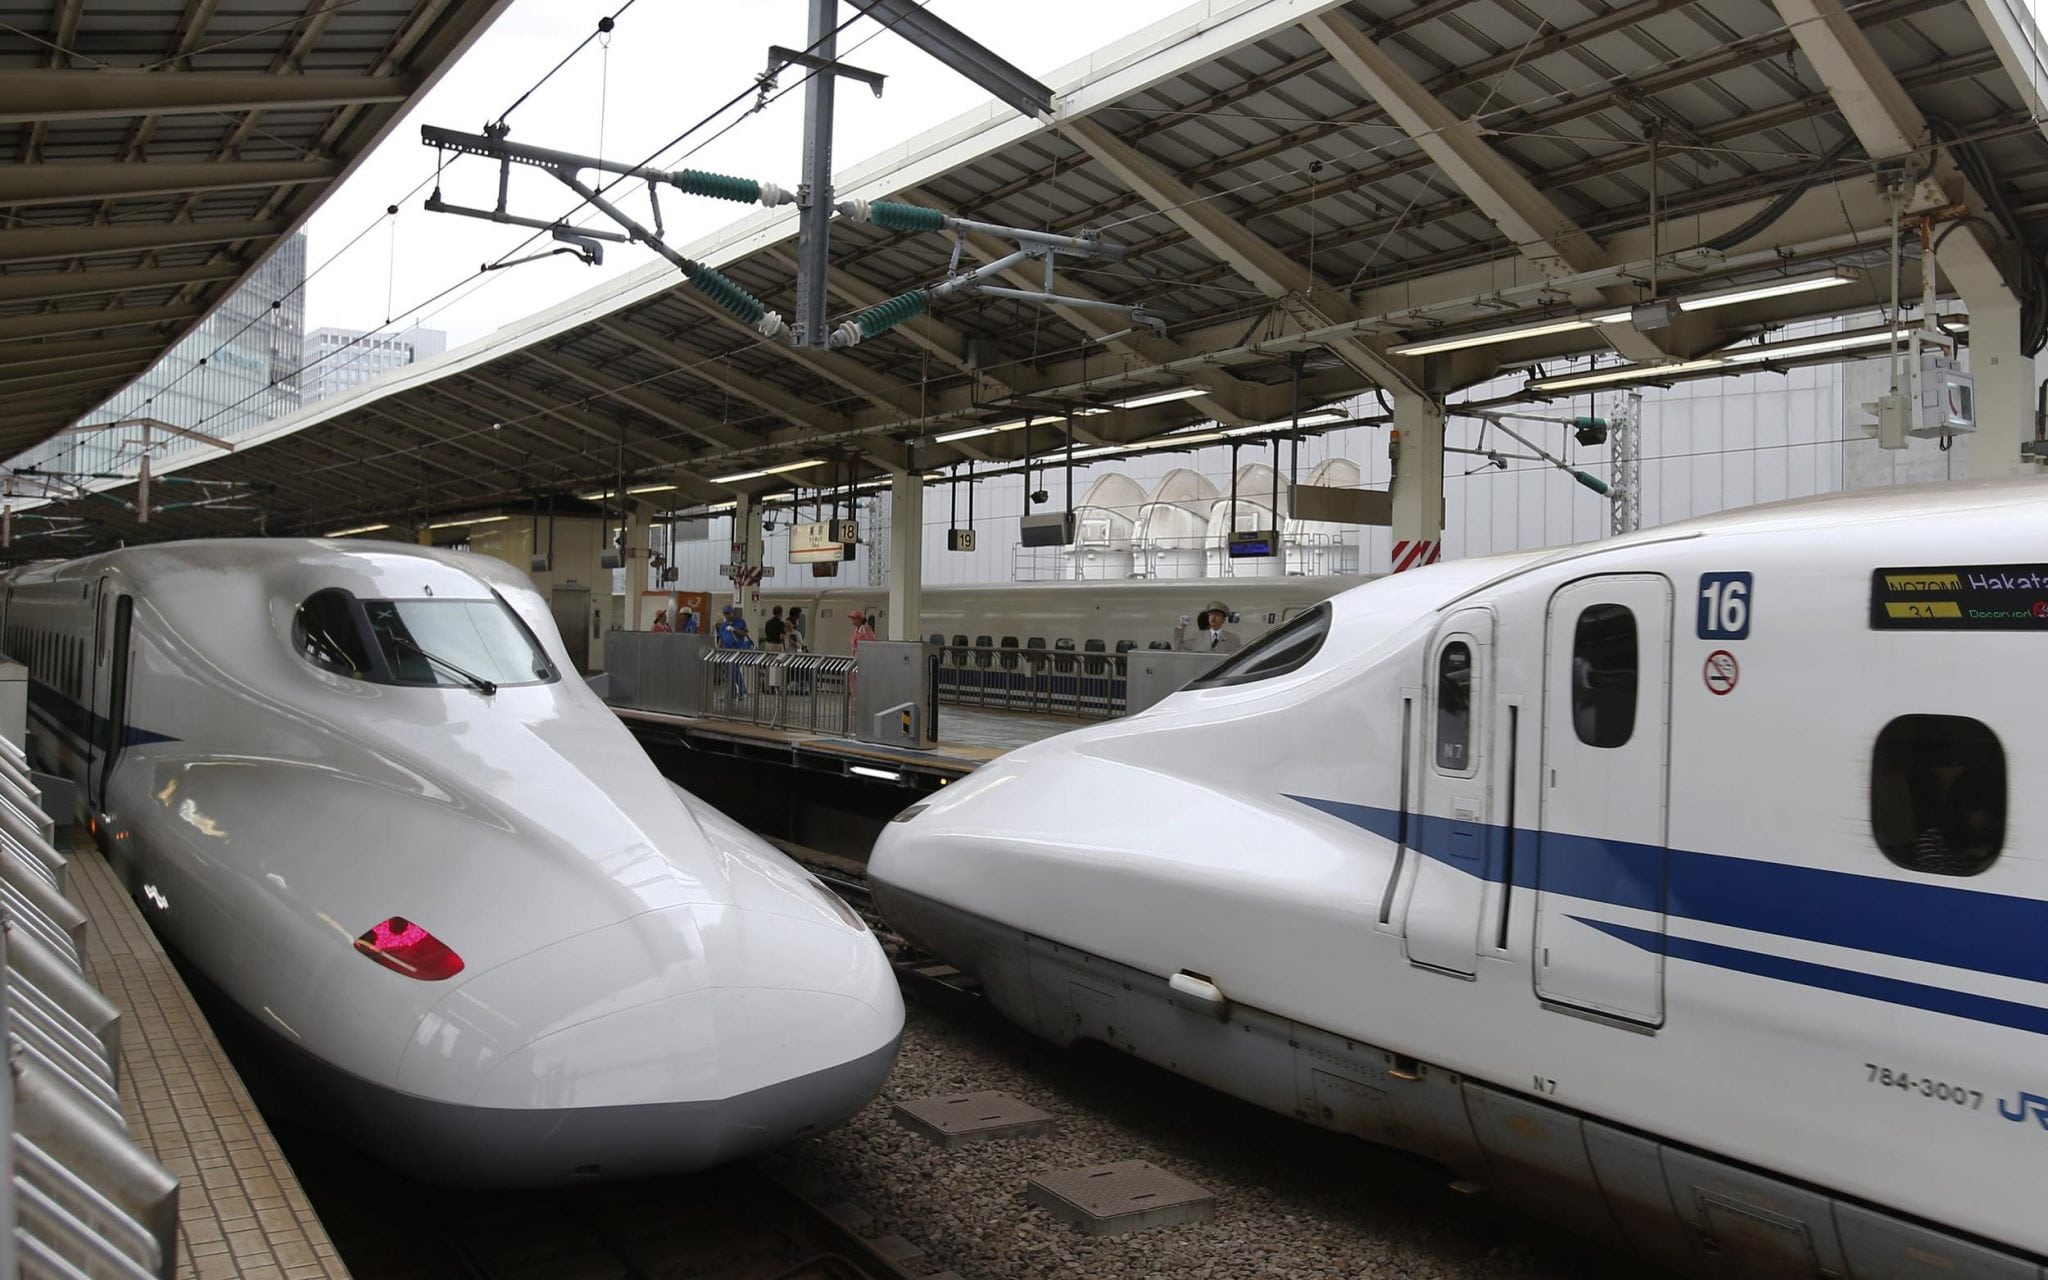 does the united states have high speed bullet trains like those in japan and europe